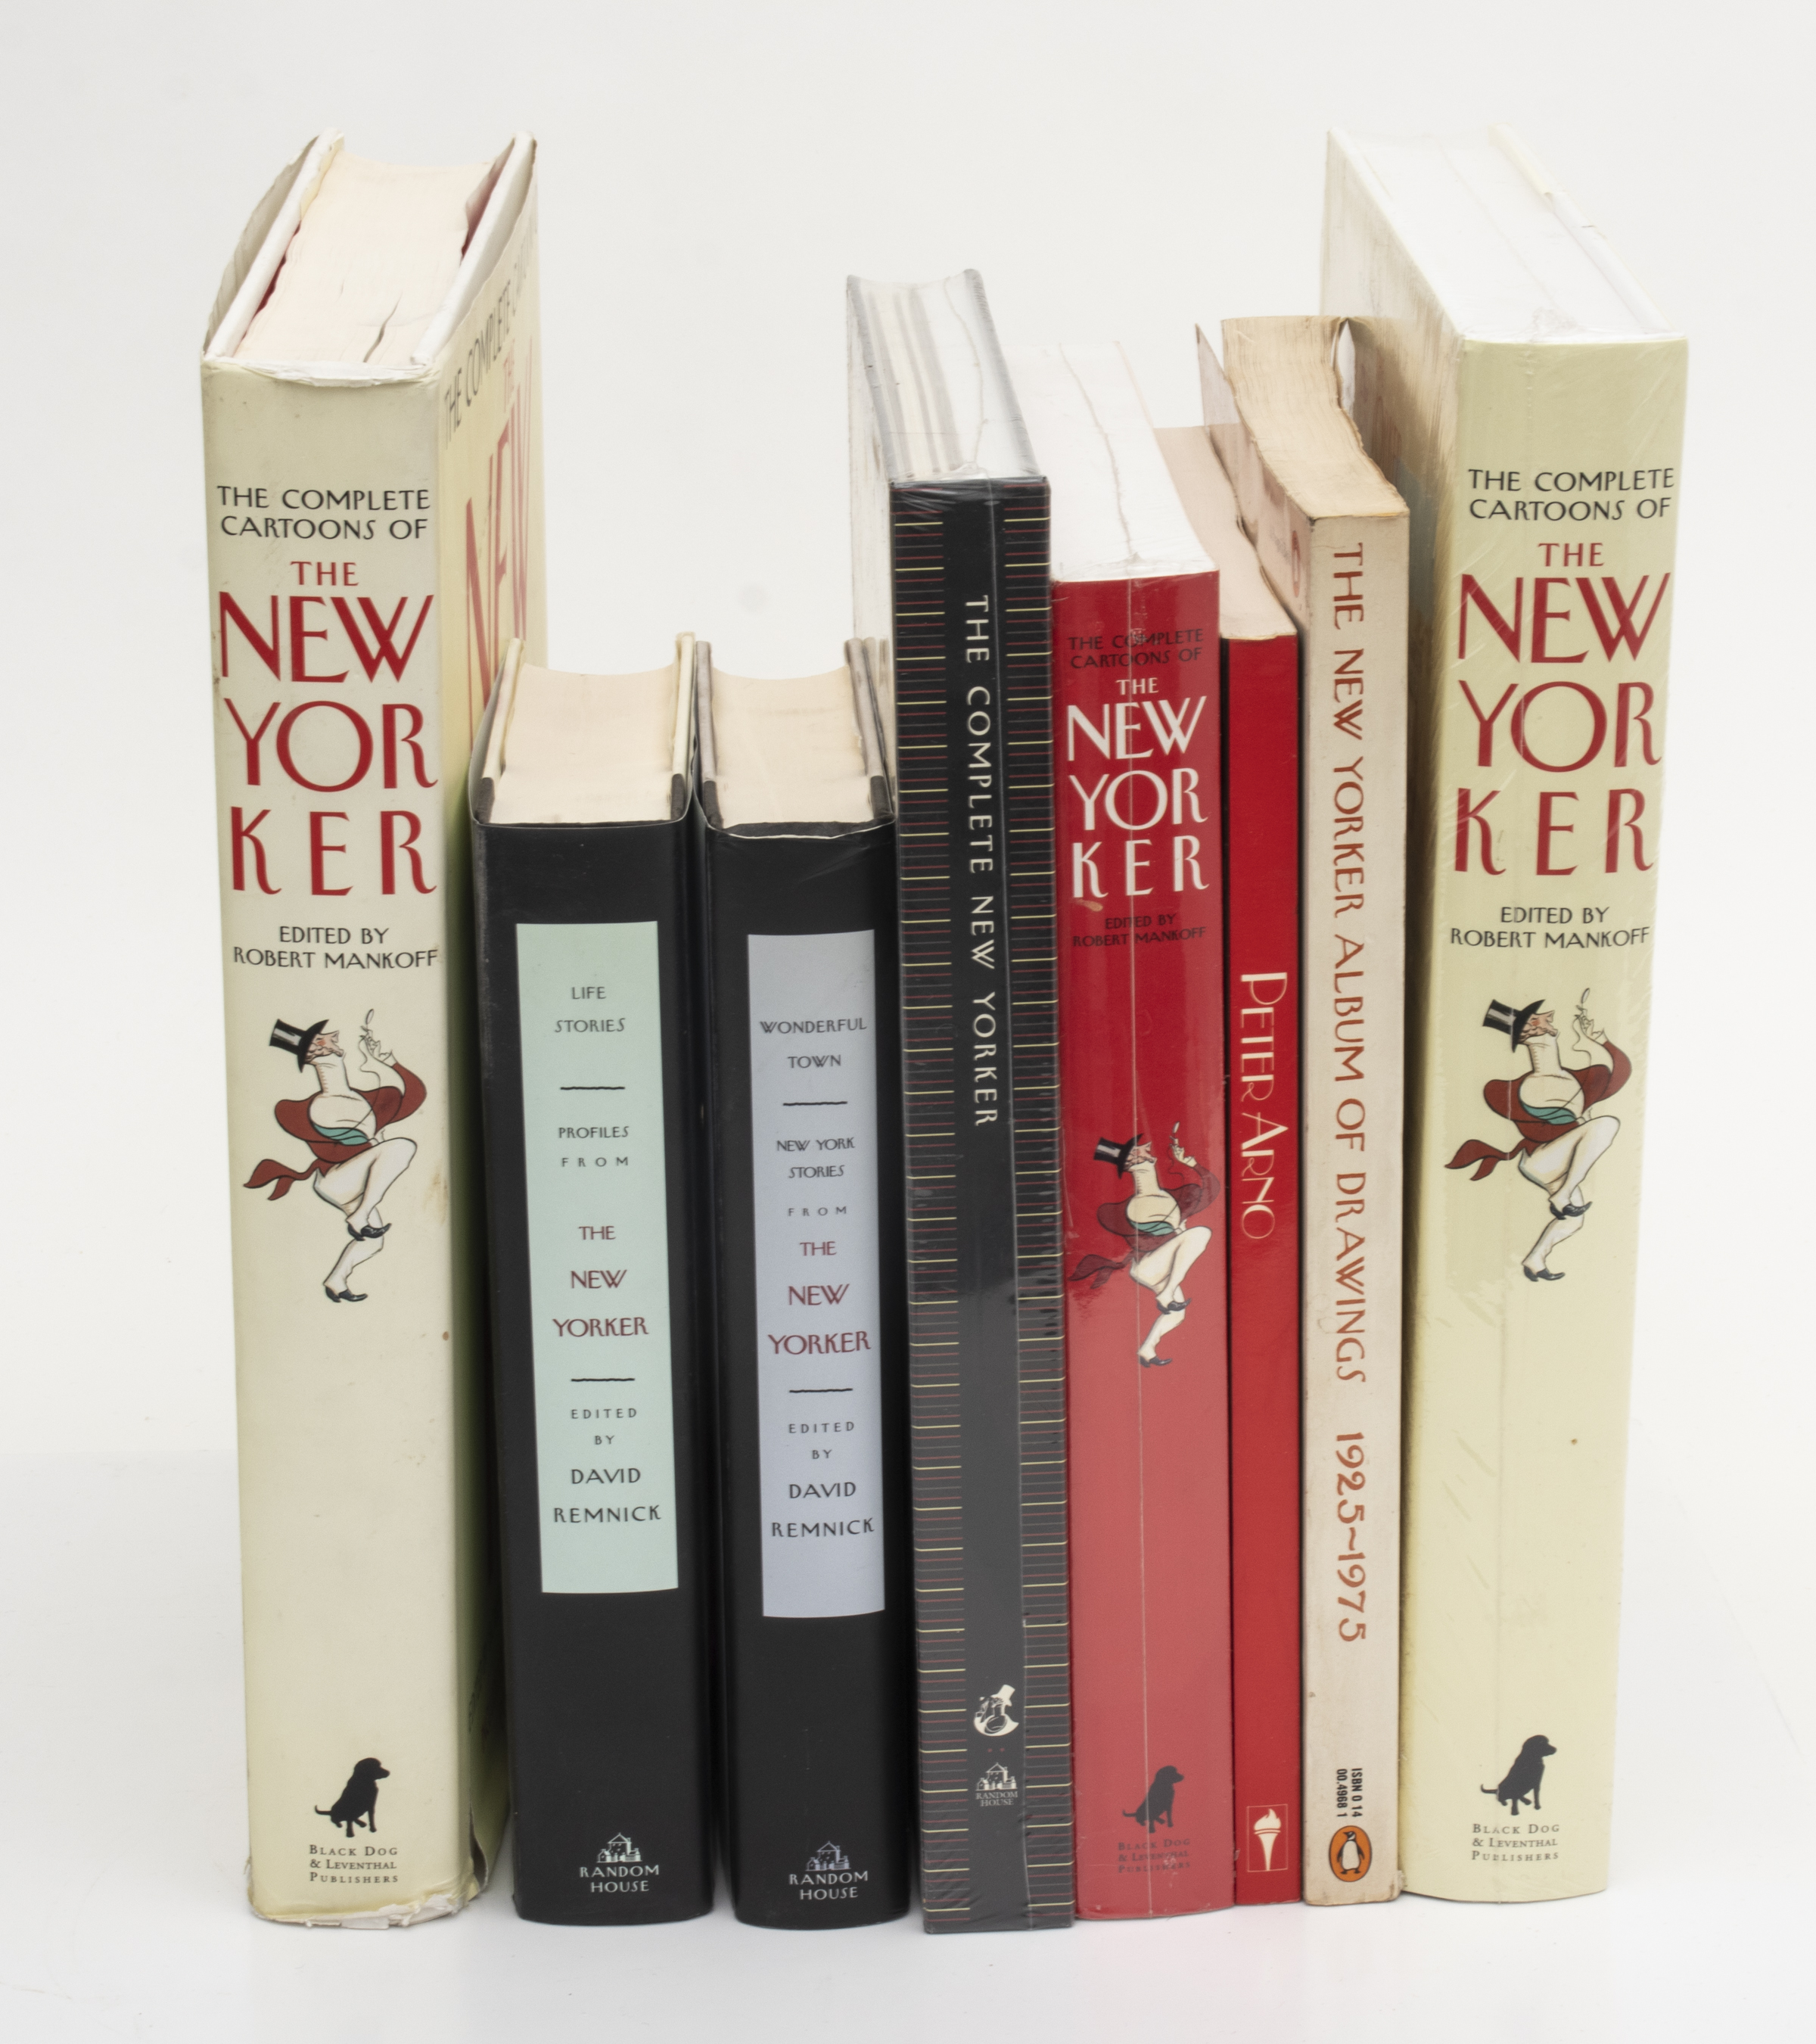 GROUP OF BOOKS ON THE NEW YORKER  3c4590